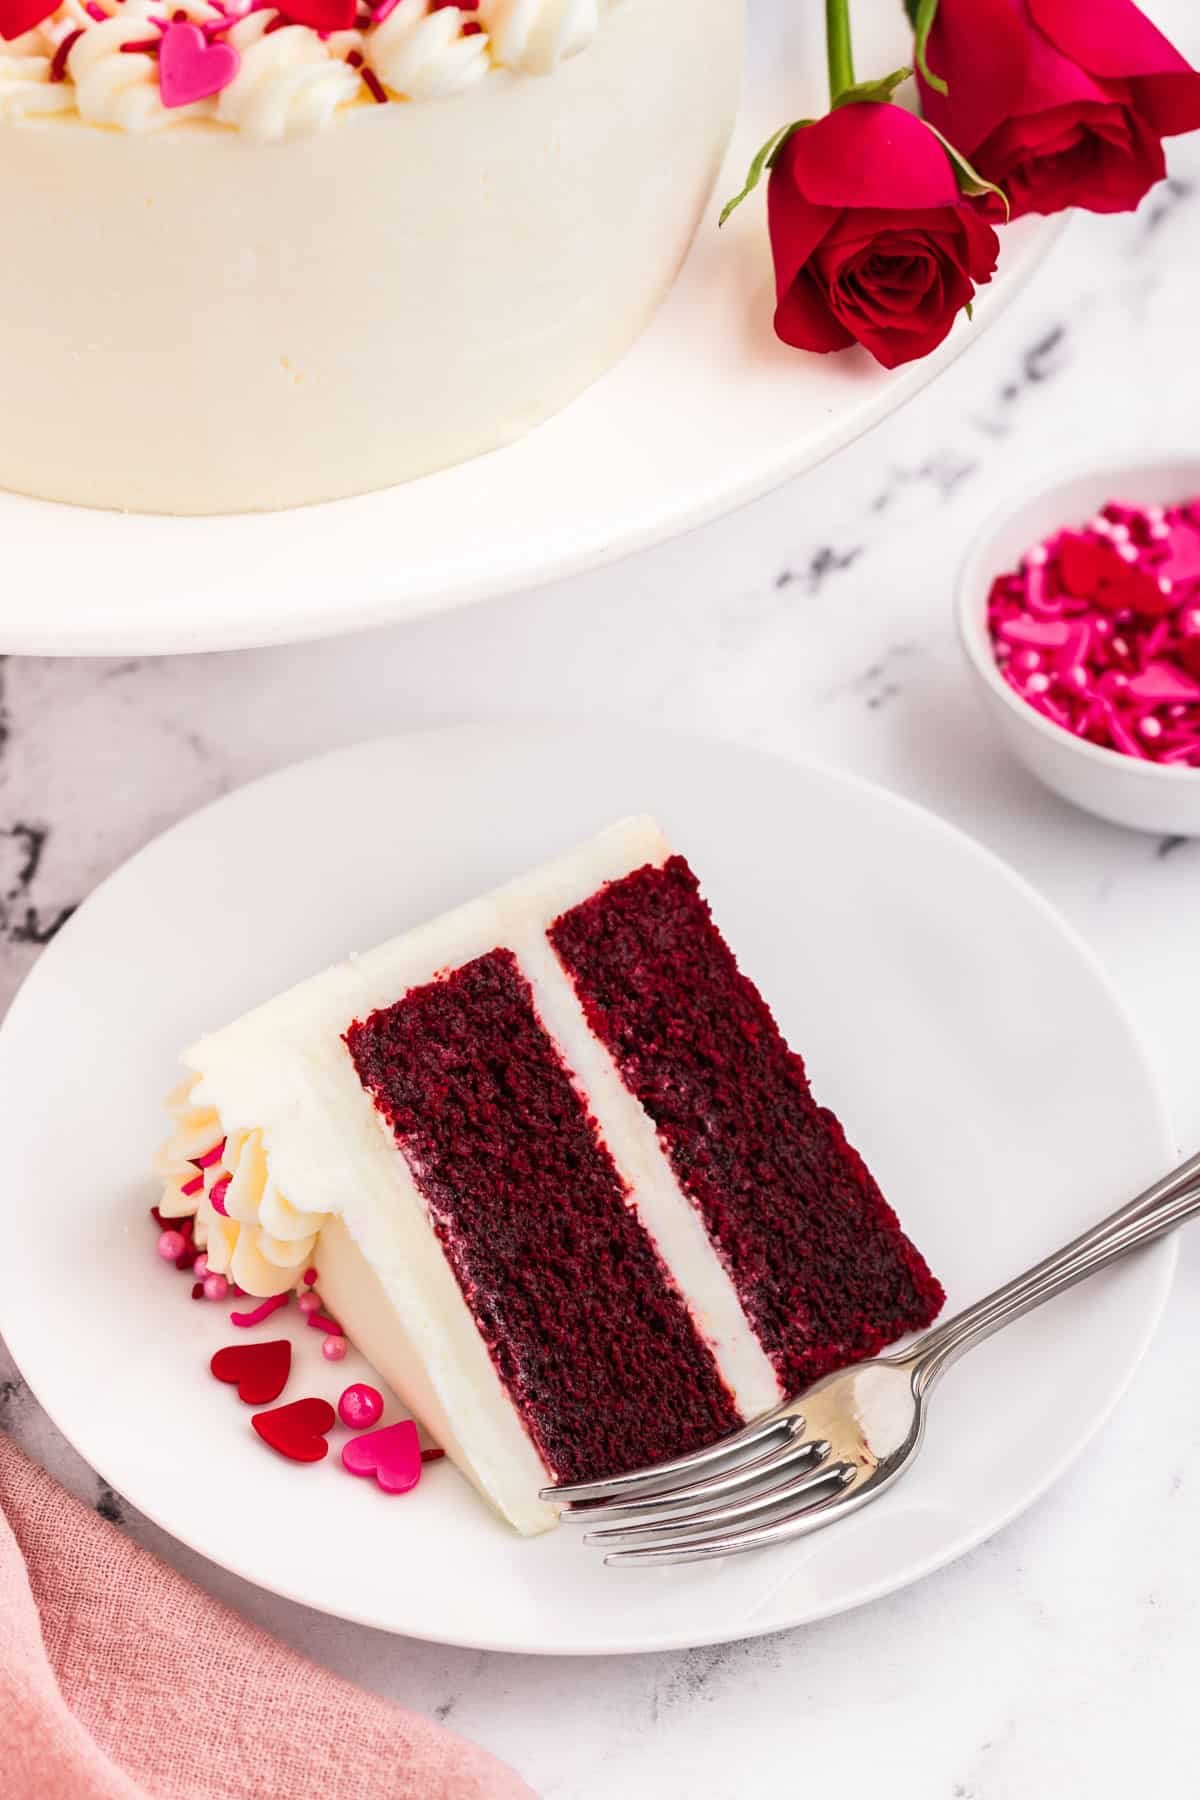 A slice of red velvet heart cake with a fork on the plate.